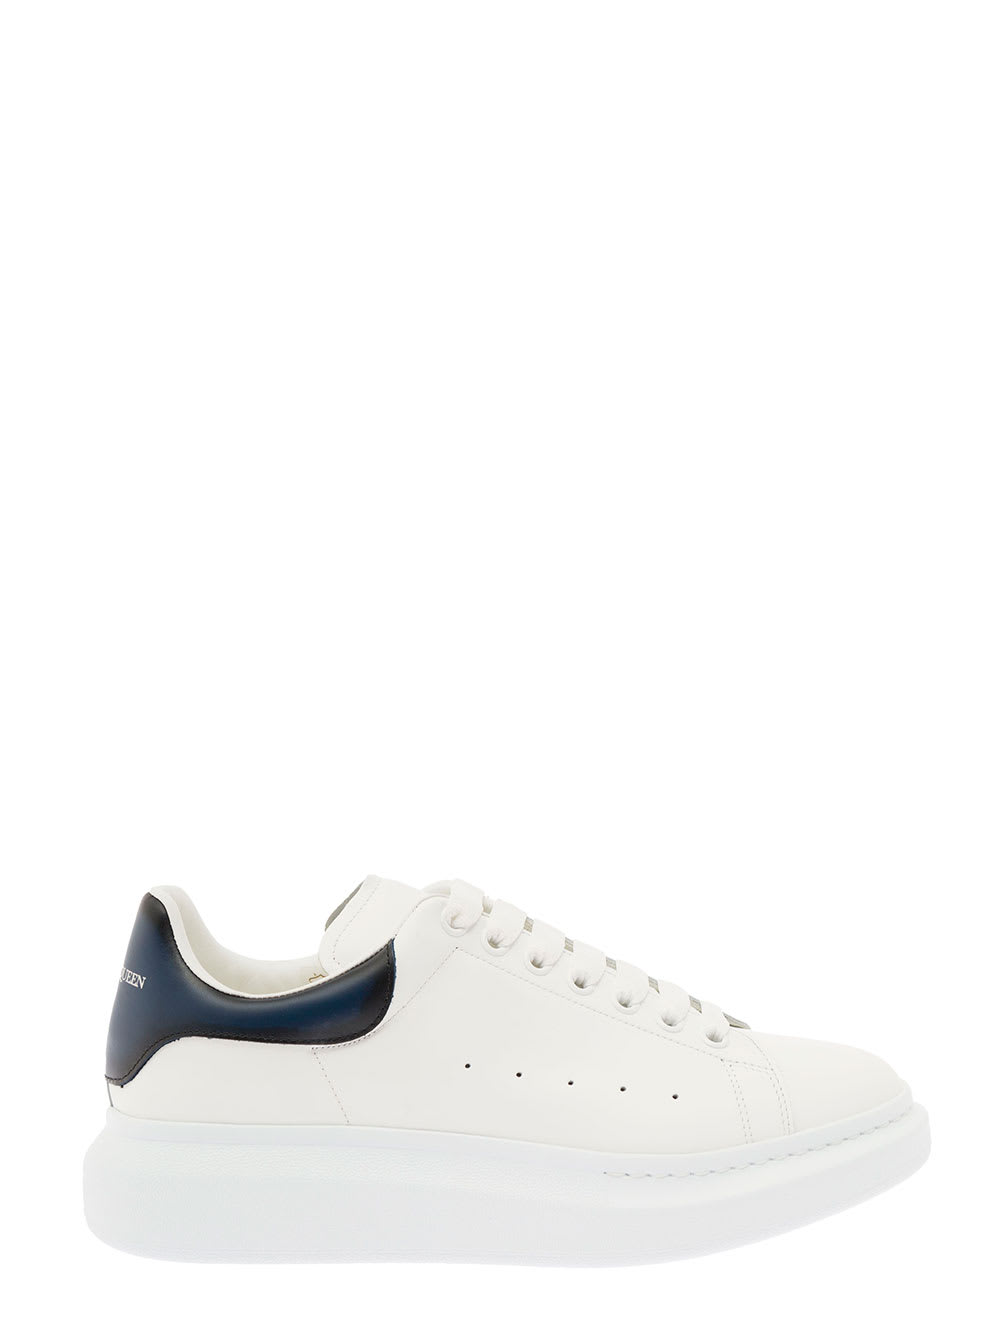 White Larry Sneakers In Leather With Contrasting Heel Counter Alexander Mcqueen Man